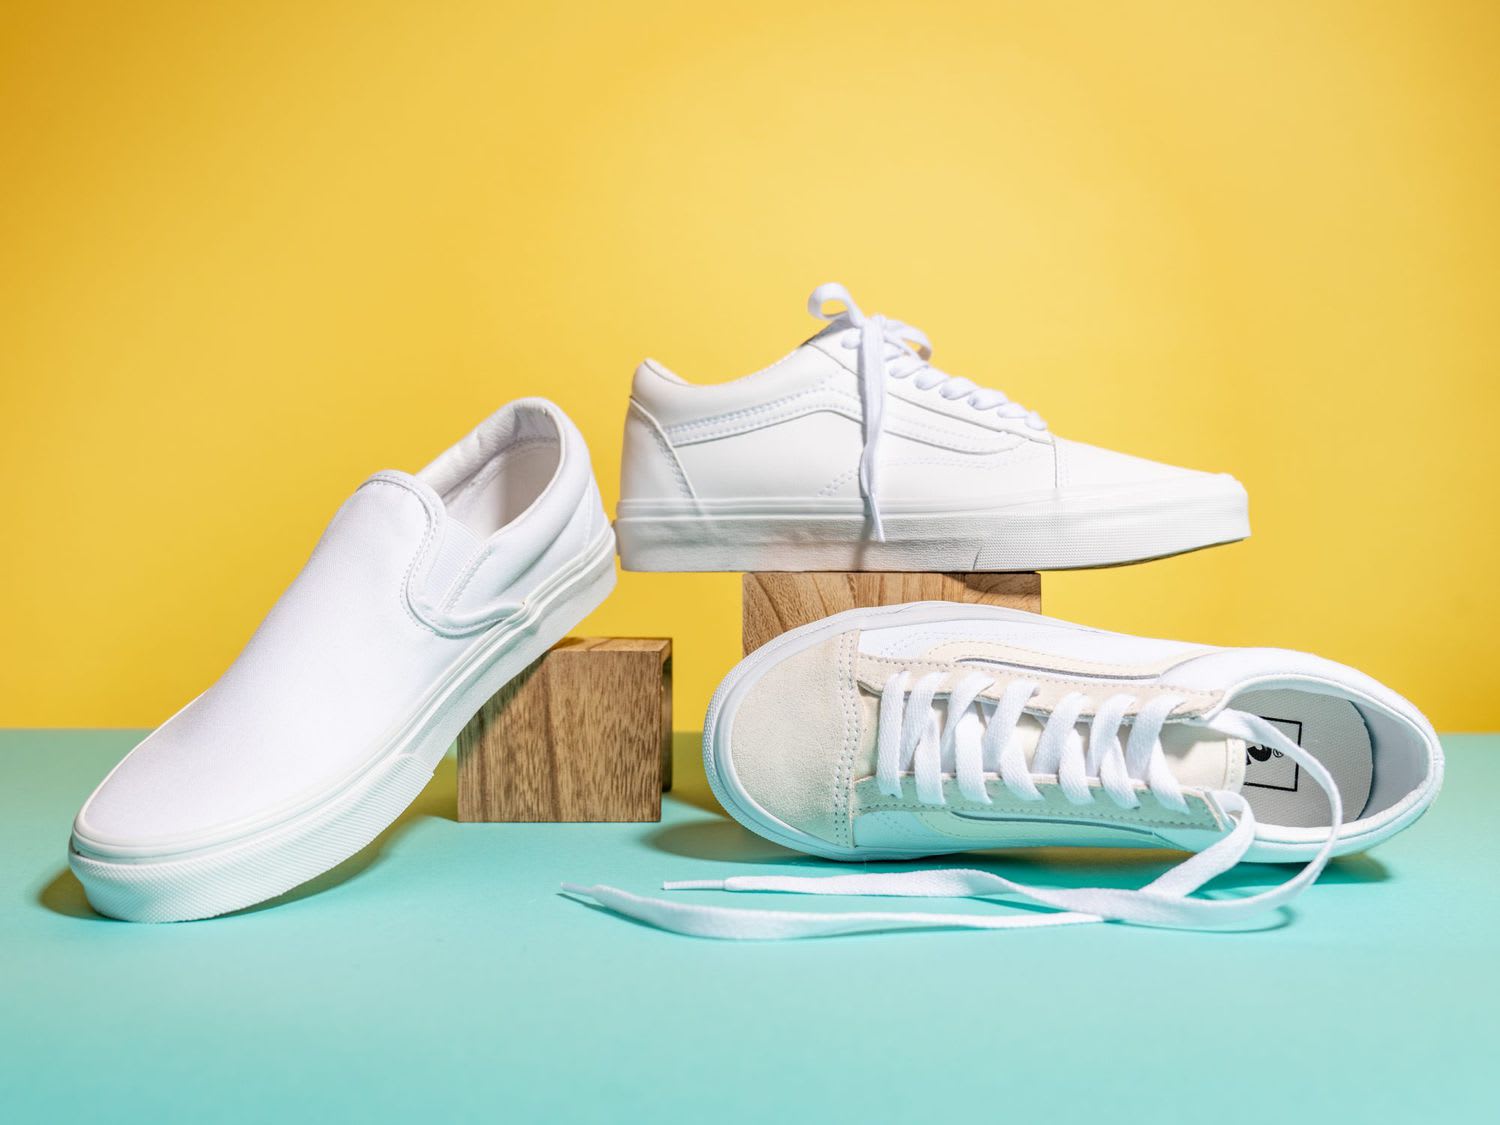 How to Clean White Shoes at Home Without Bleach or Expensive Cleaners